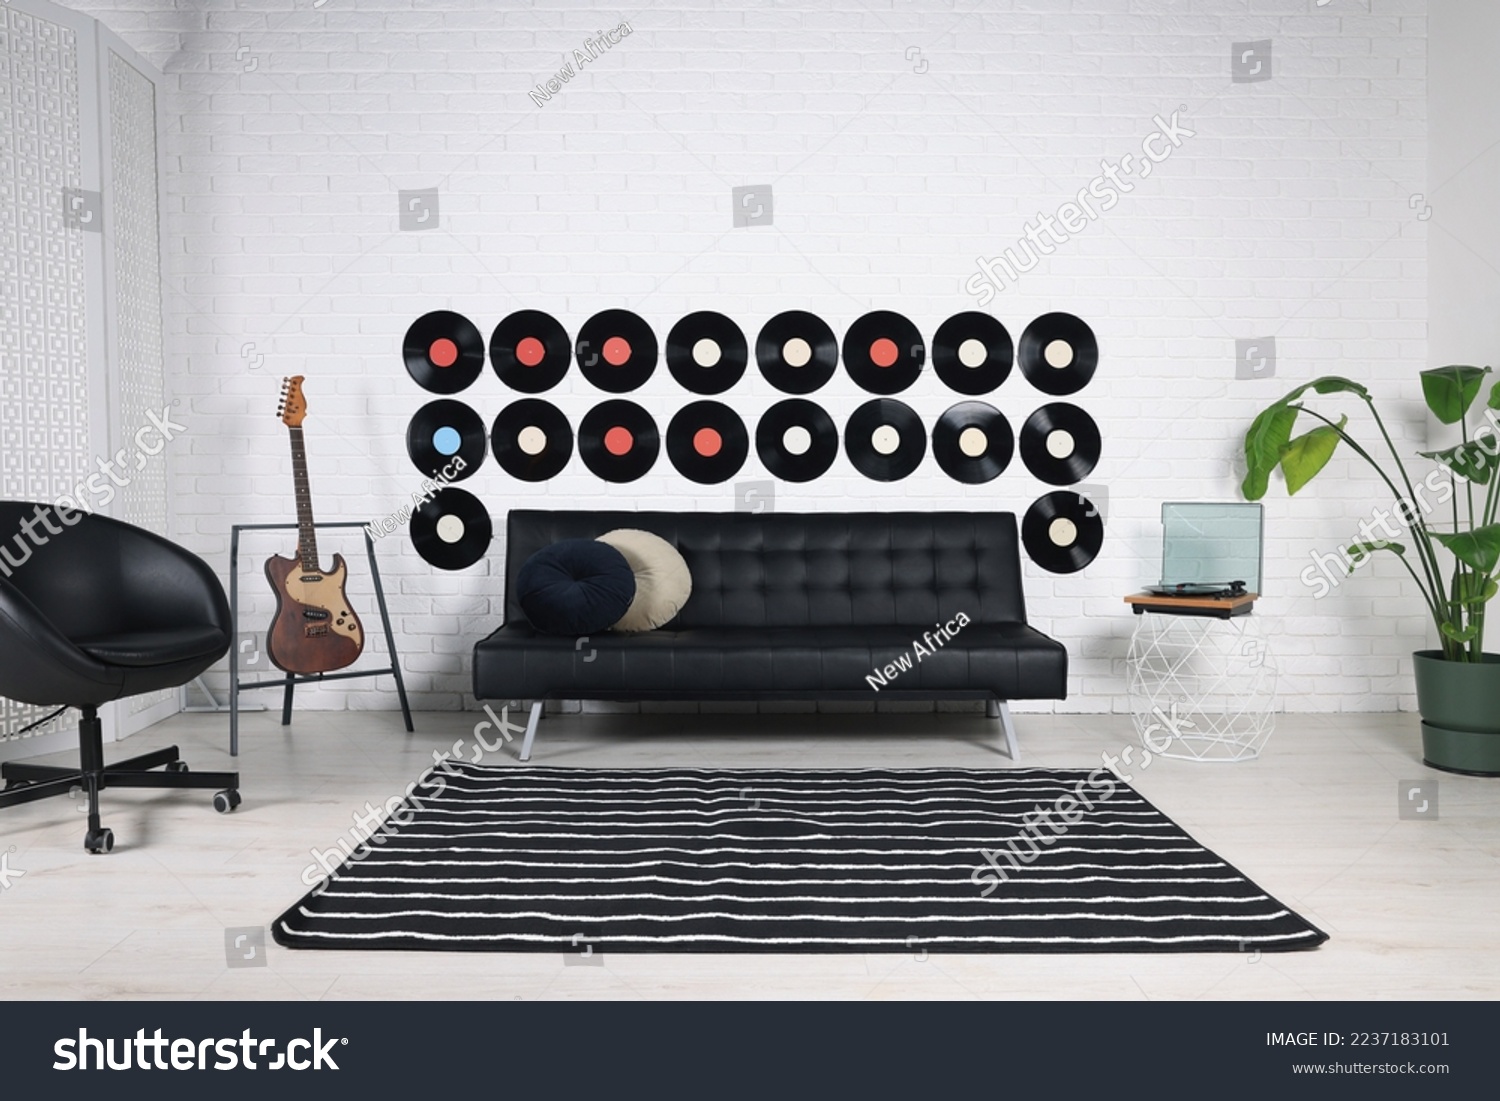 Living room decorated with vinyl records. Interior design #2237183101